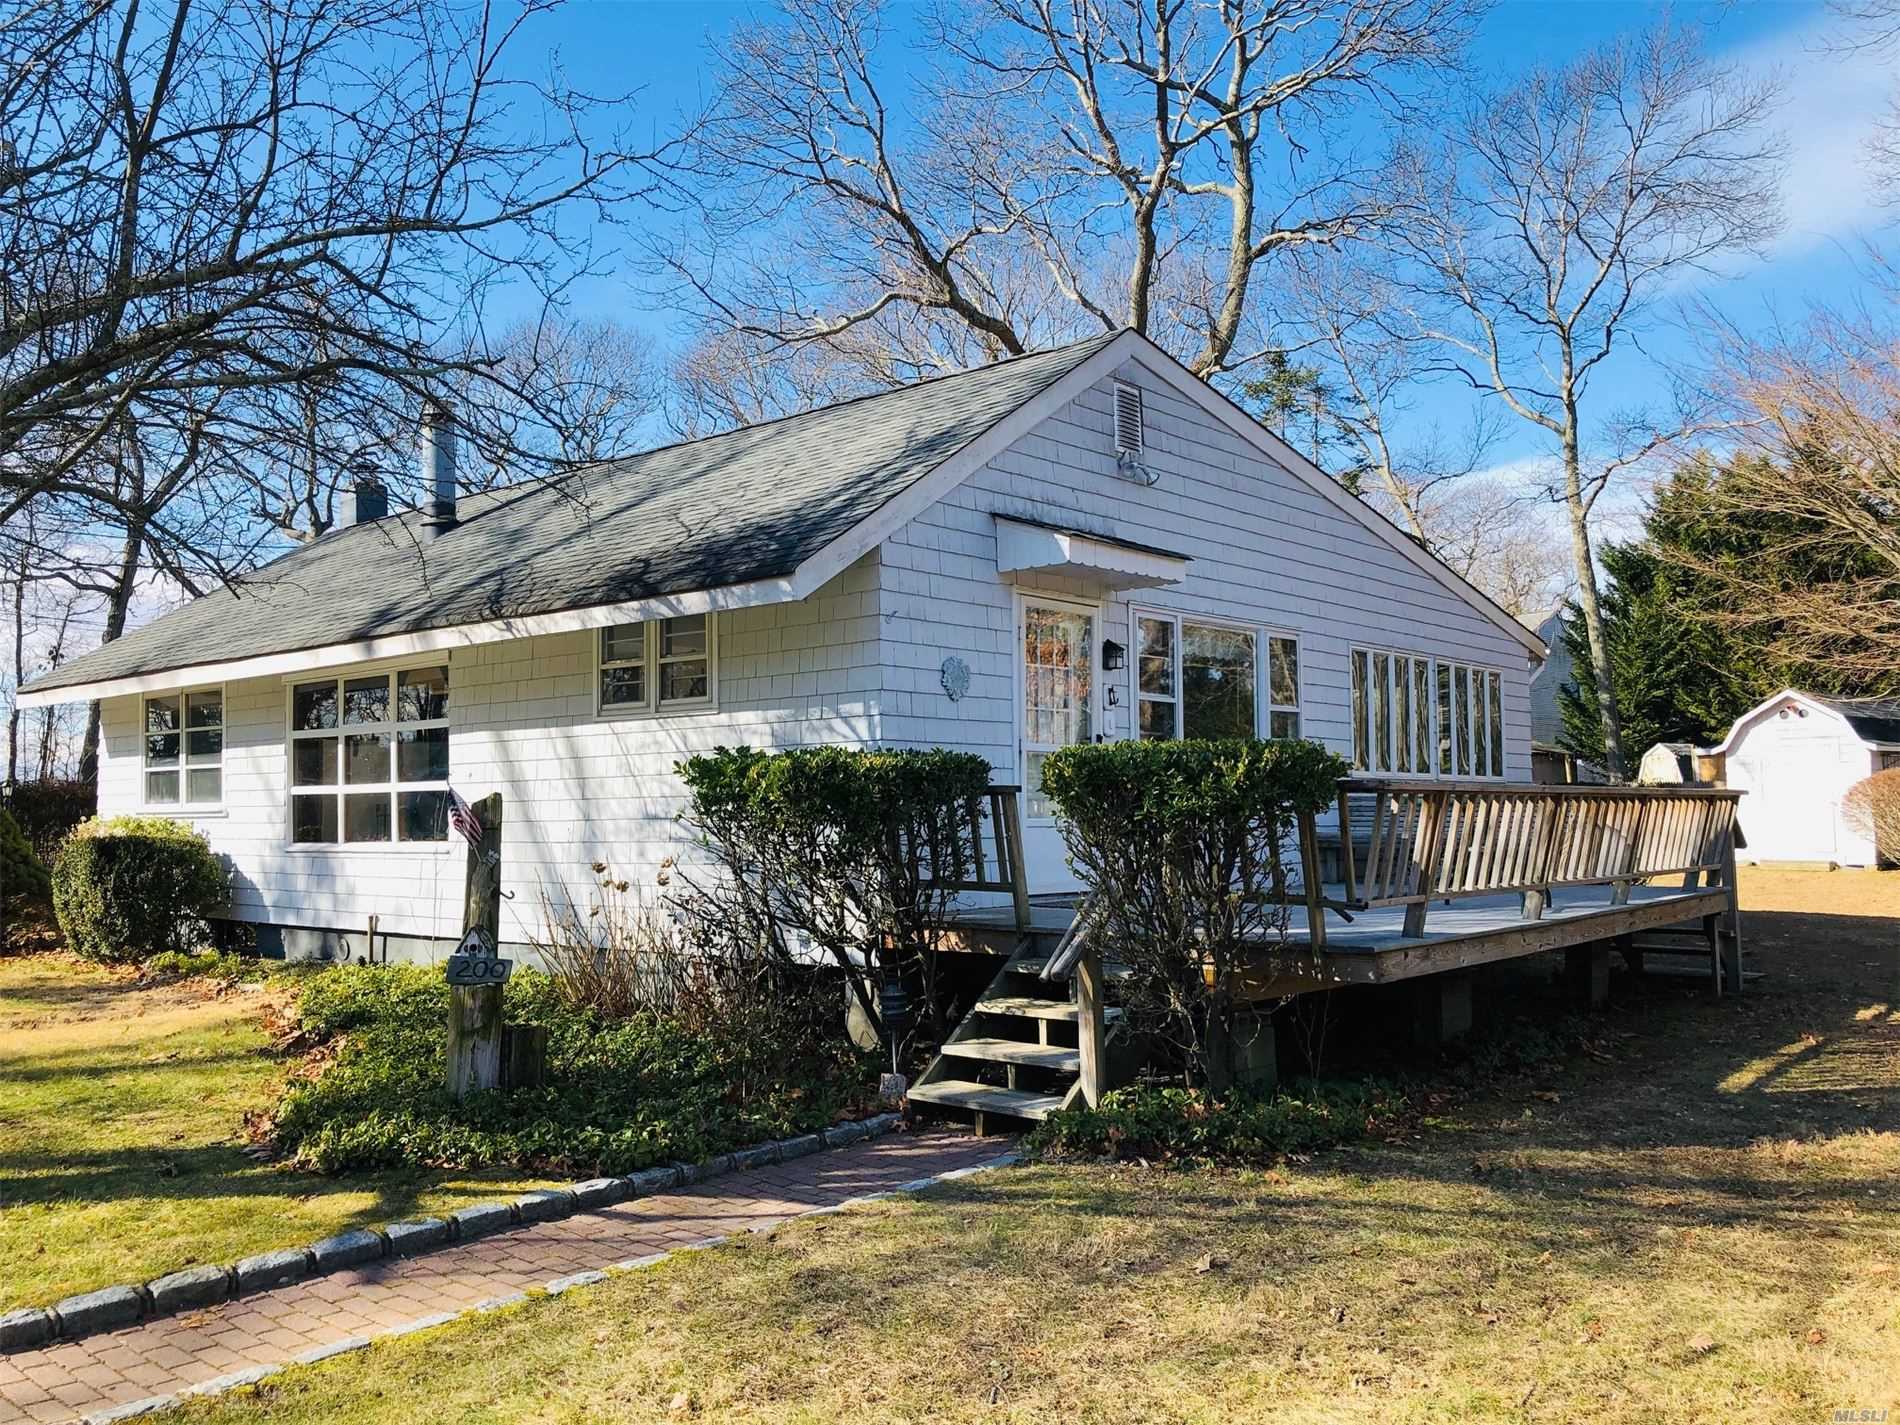 Perfect Location in Town! An Adorable Fixer Upper Full of Character and Awaiting Your Design. 2 Bedrooms and 1 Full Bath. A Fantastic Spot on a Quiet Street Overlooking the Private Golf Course in Laurel. Close to all the North Fork has to Offer